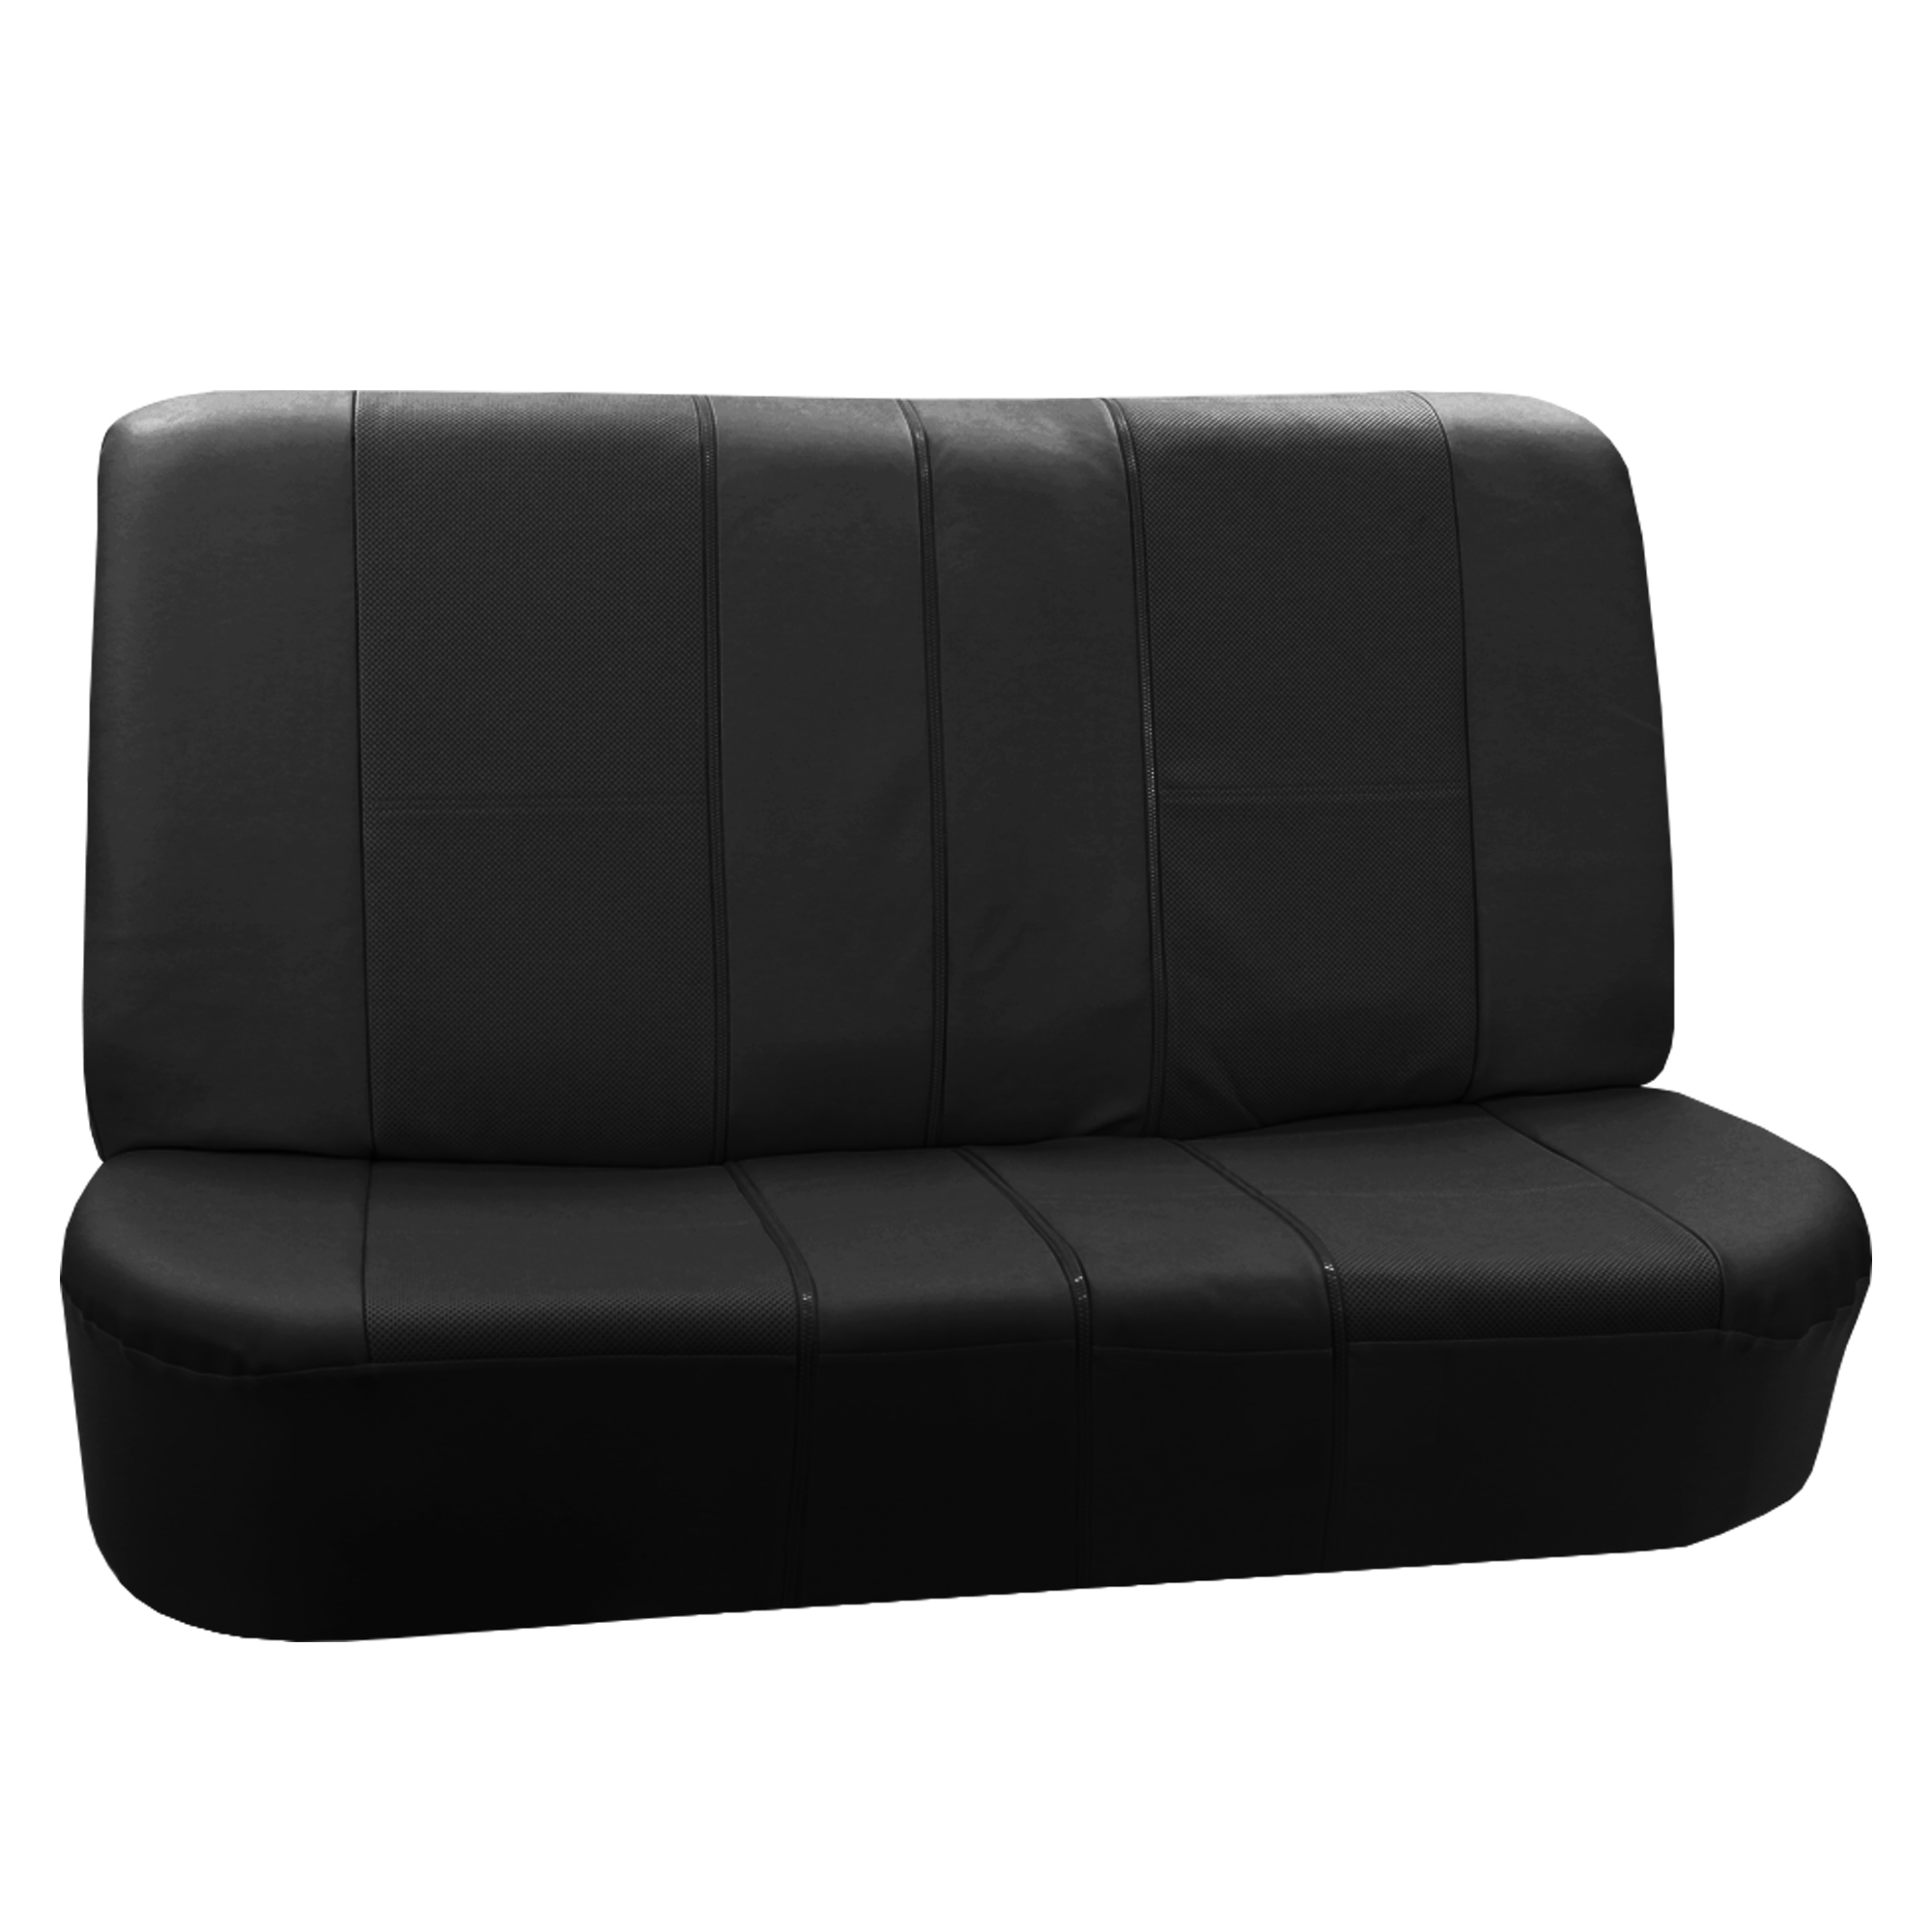 FH Group Black Deluxe Faux Leather Airbag Compatible and Split Bench Car Seat Covers, 2 Headrest Full Set